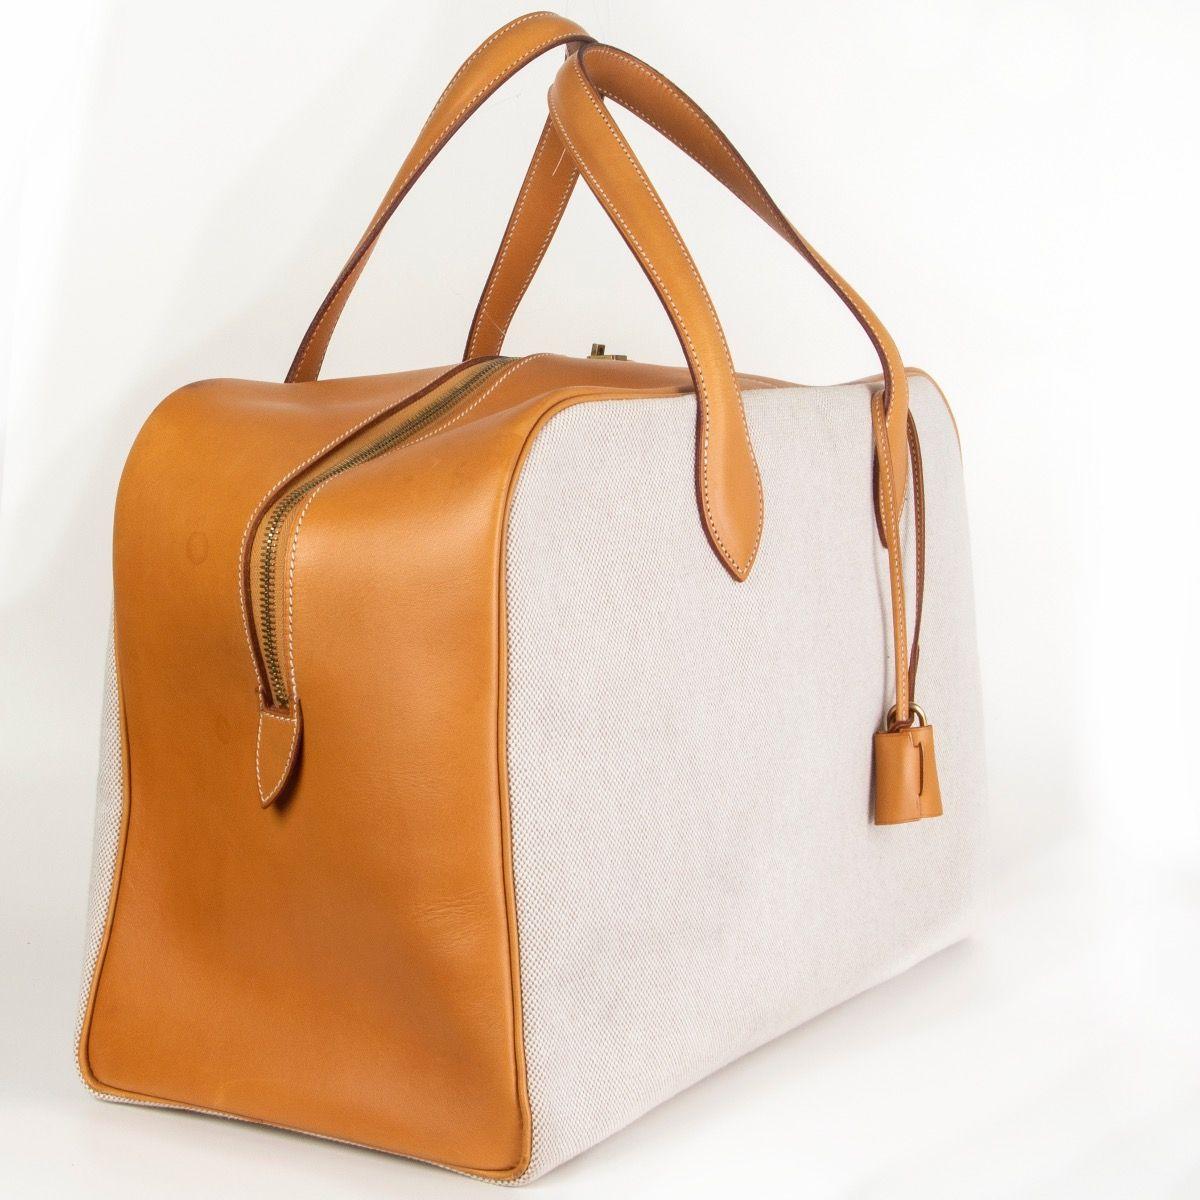 100% authentic Hermes 'Victoria 45' bag in Natural (tan beige) Vache Natural leather and oatmeal Toile H canvas. Closes with a zipper on top. Lined in cotton. Has been carried with some marks on the leather - see photos. Overall in very good